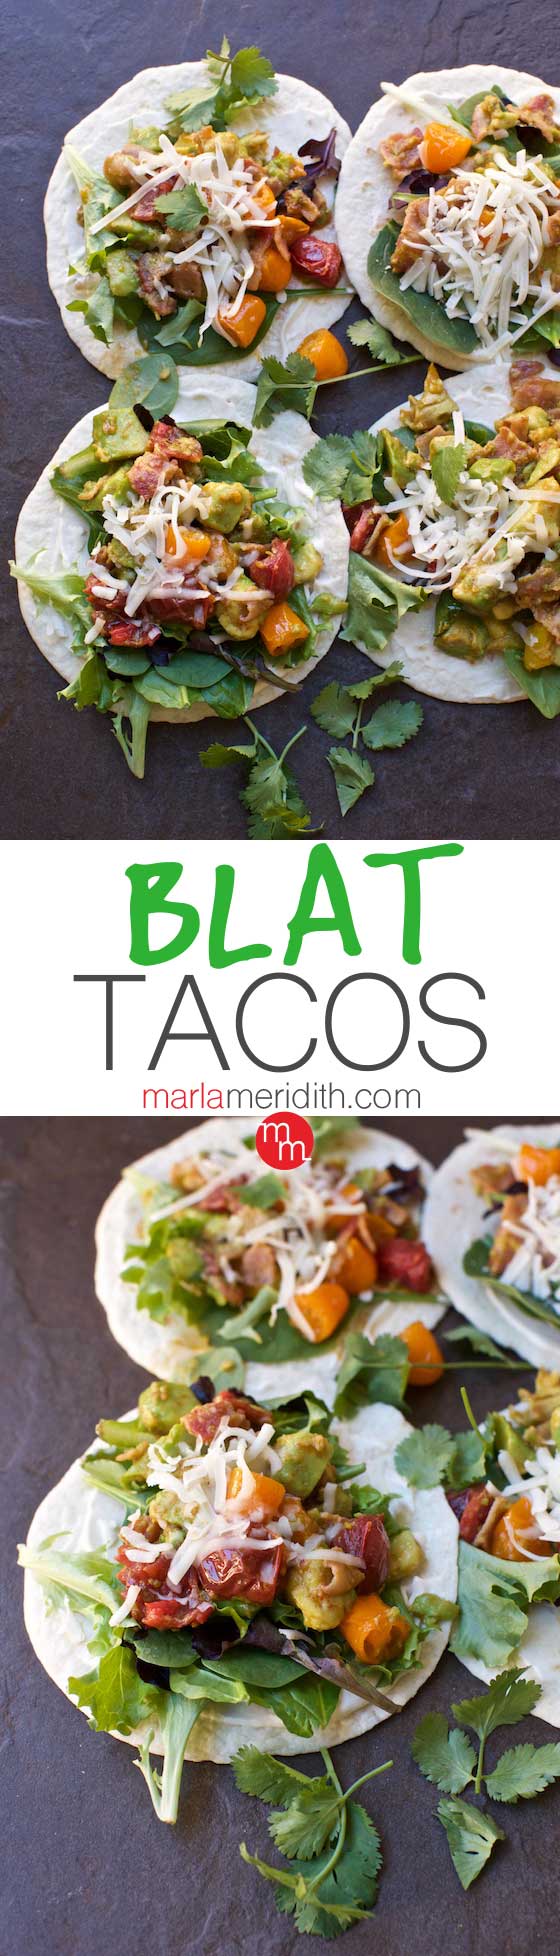 These BLAT Tacos (Bacon, Lettuce, Tomato, Avocado) are perfect for game day and busy weeknights! MarlaMeridith.com #recipe #tacos #mexican